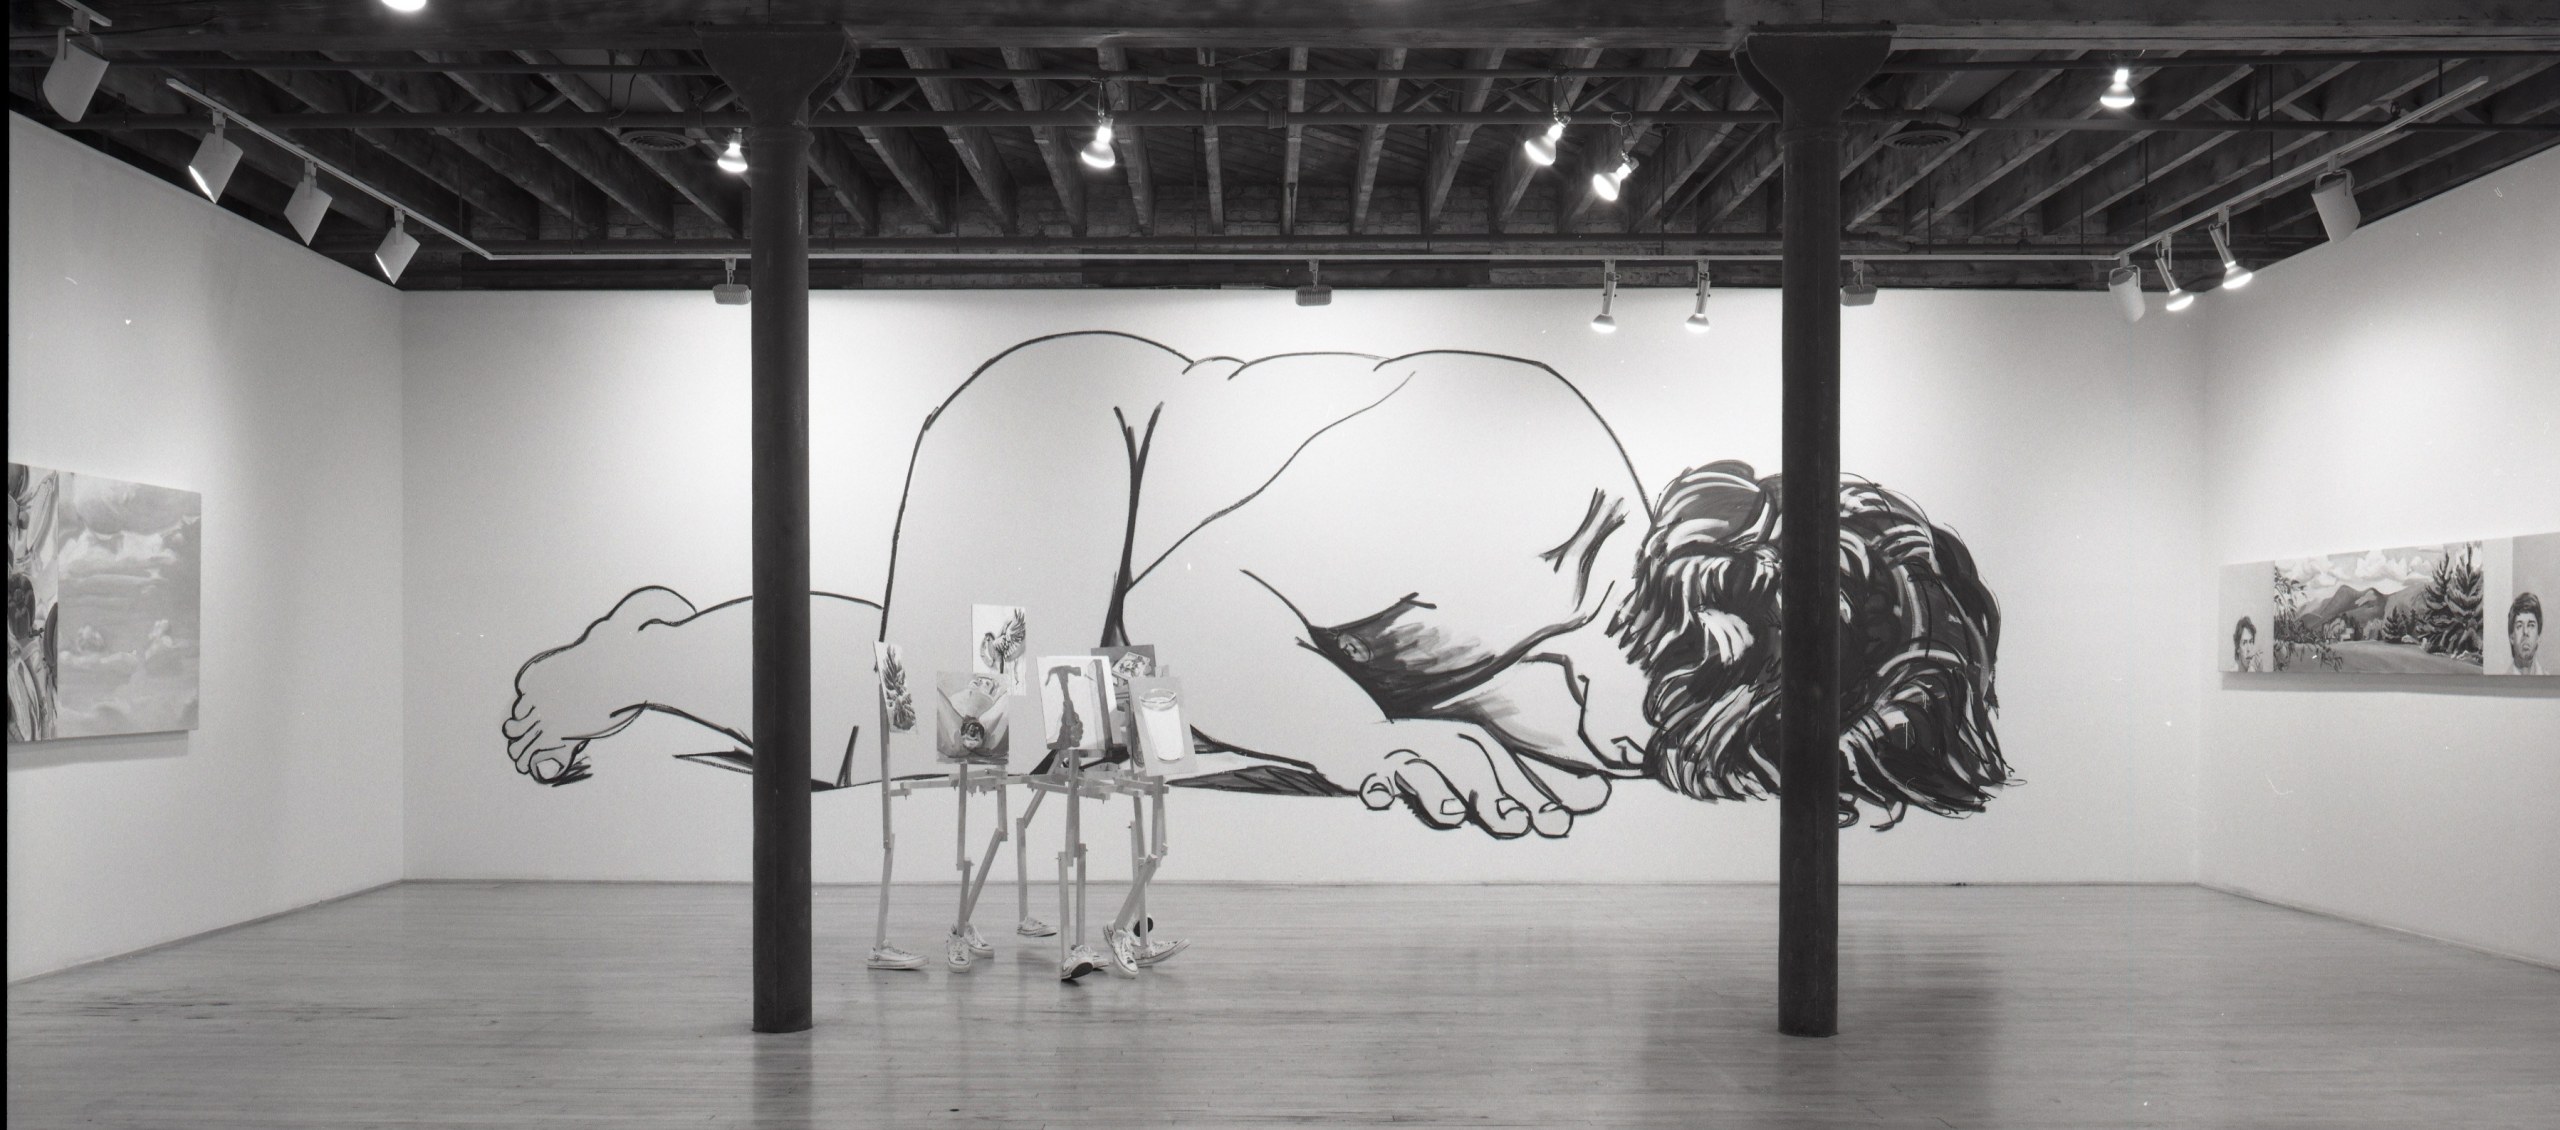 Installation view at Rhona Hoffman Gallery, Infotainment, Curated by Anne Livet, 1985